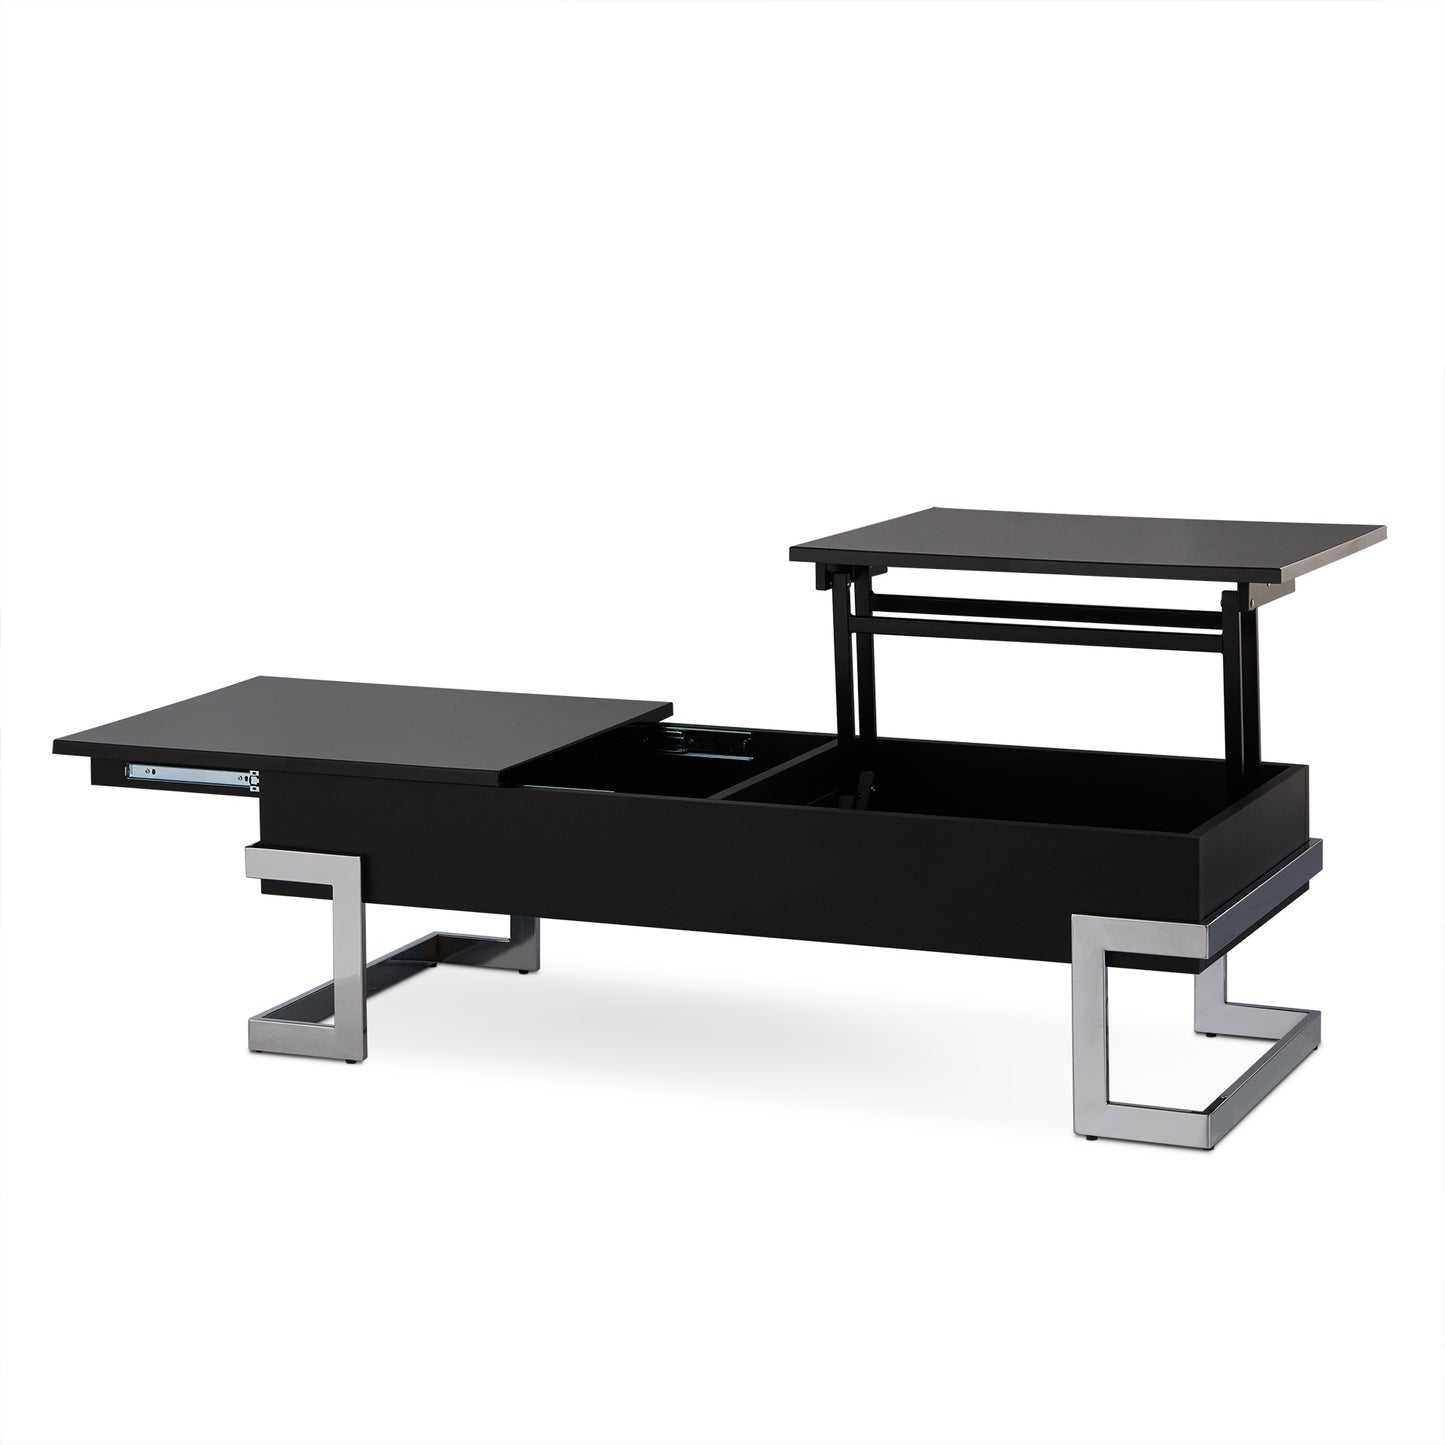 47' X 20' X 14-24' Black And Chrome Particle Board Coffee Table